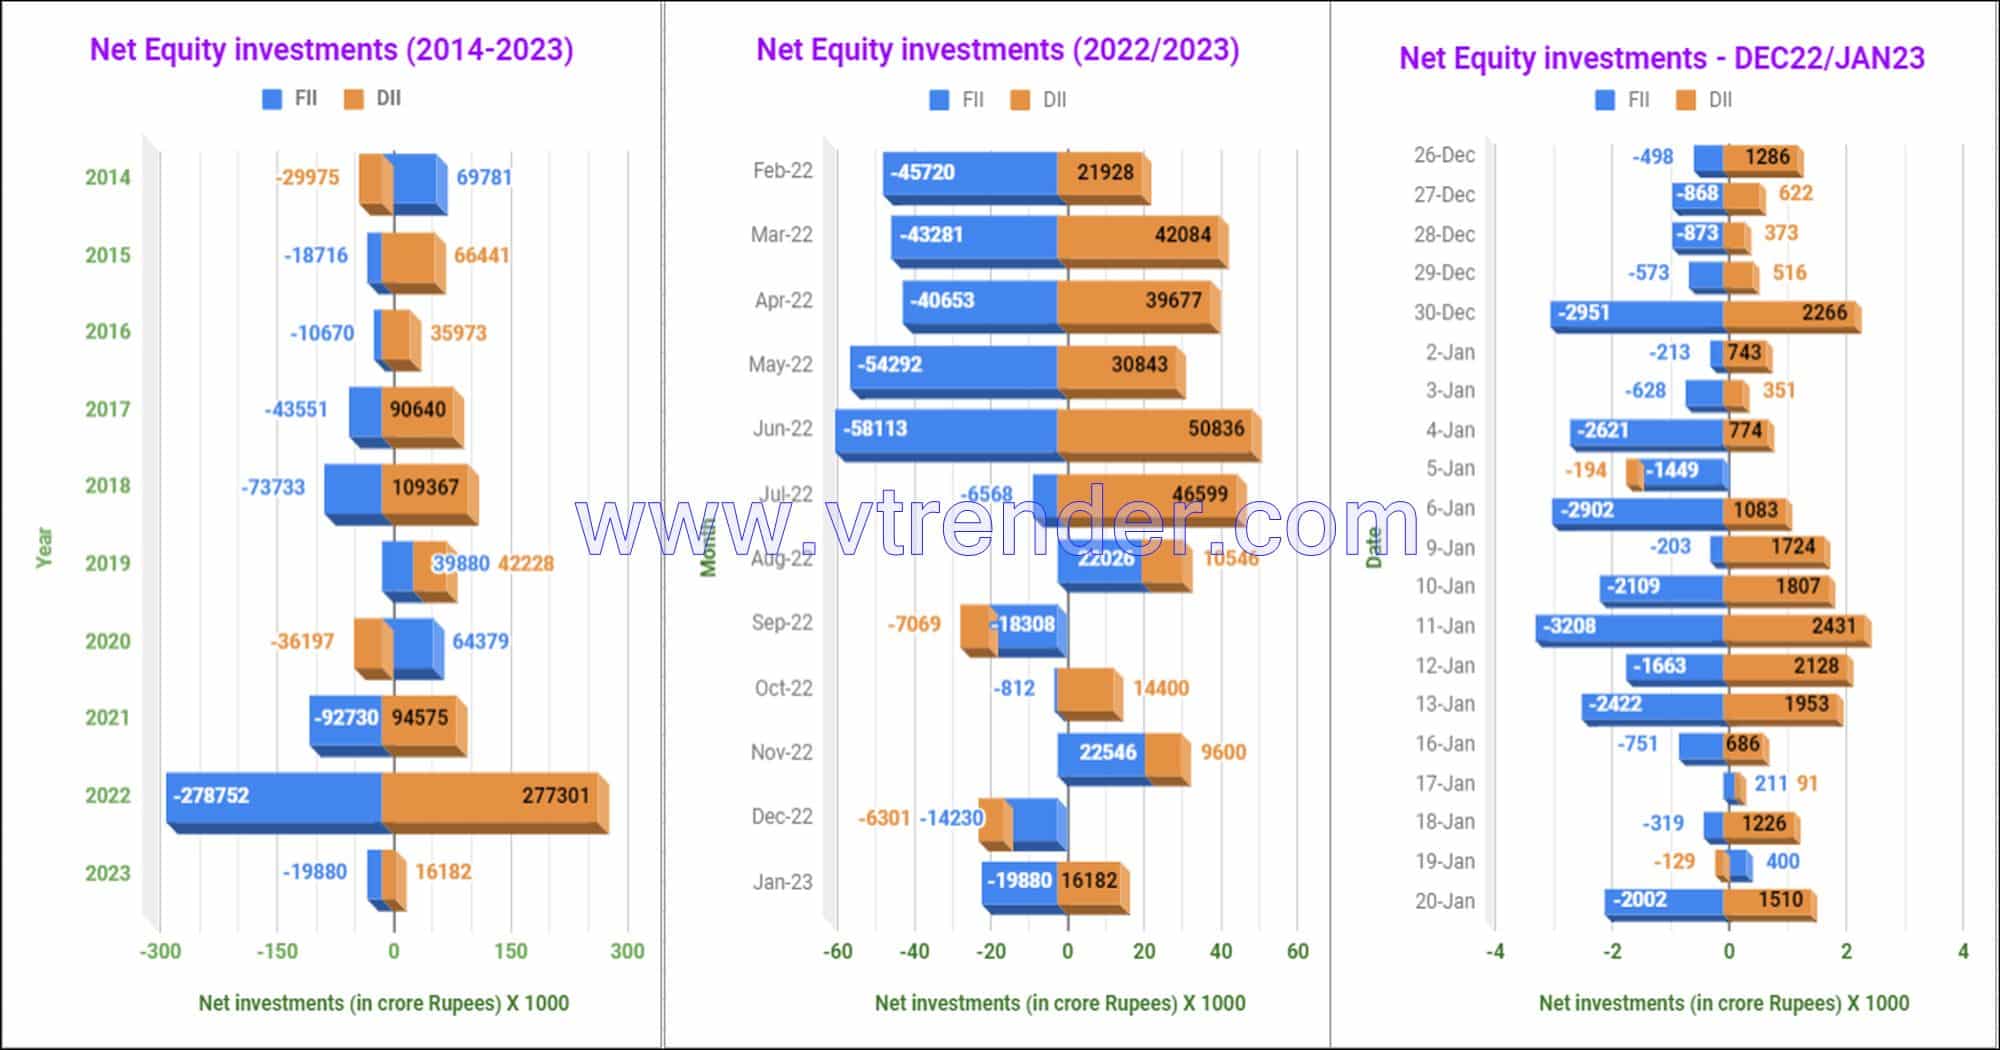 Net equity investments